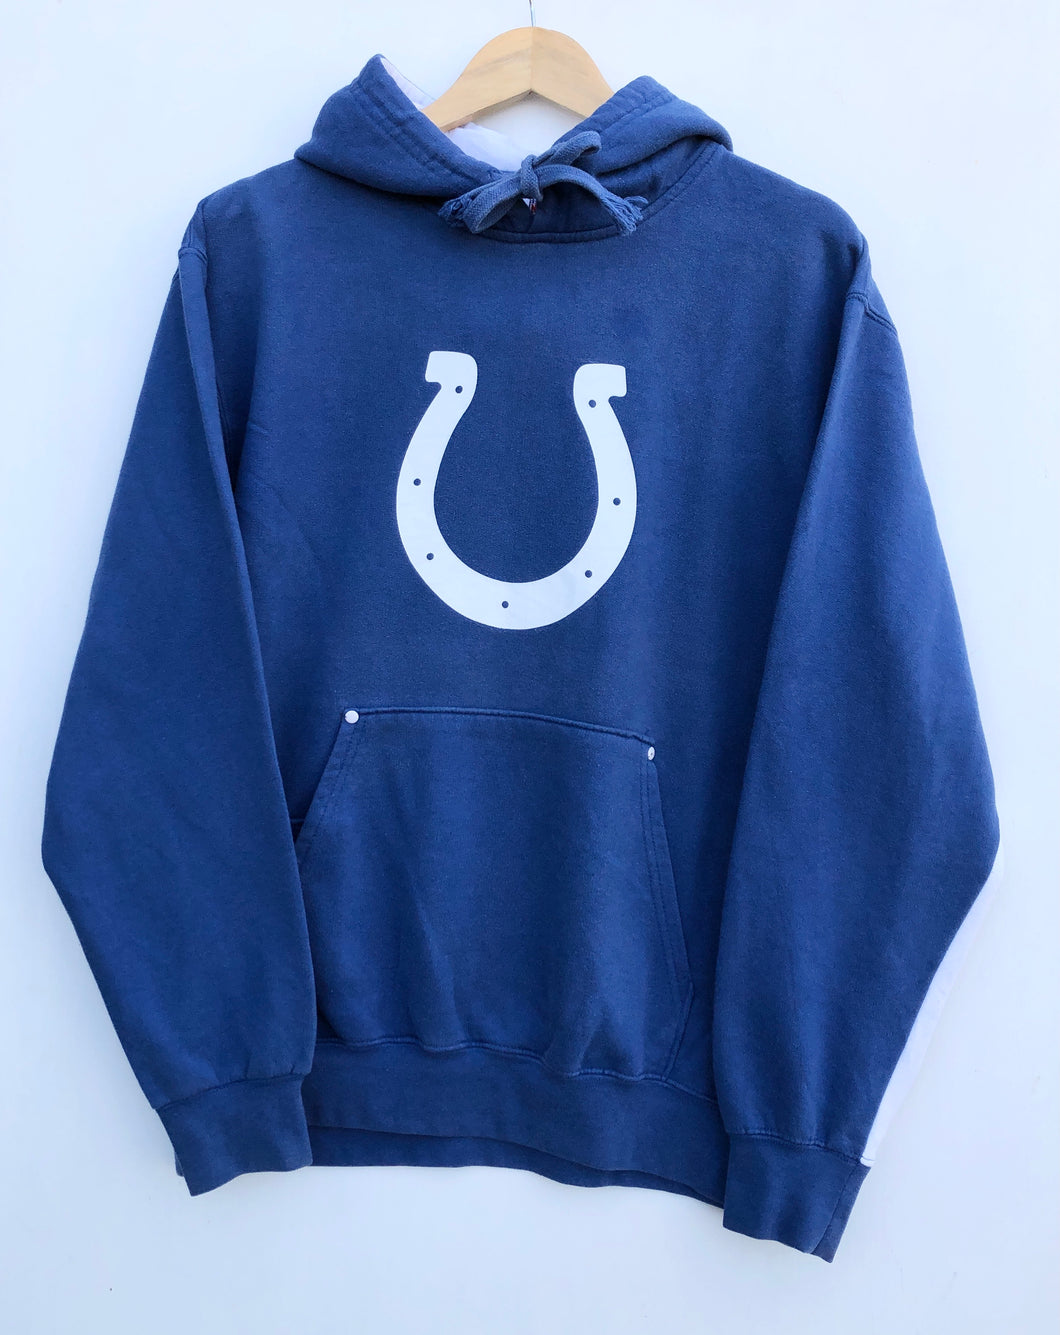 NFL Indianapolis Colts hoodie (L)